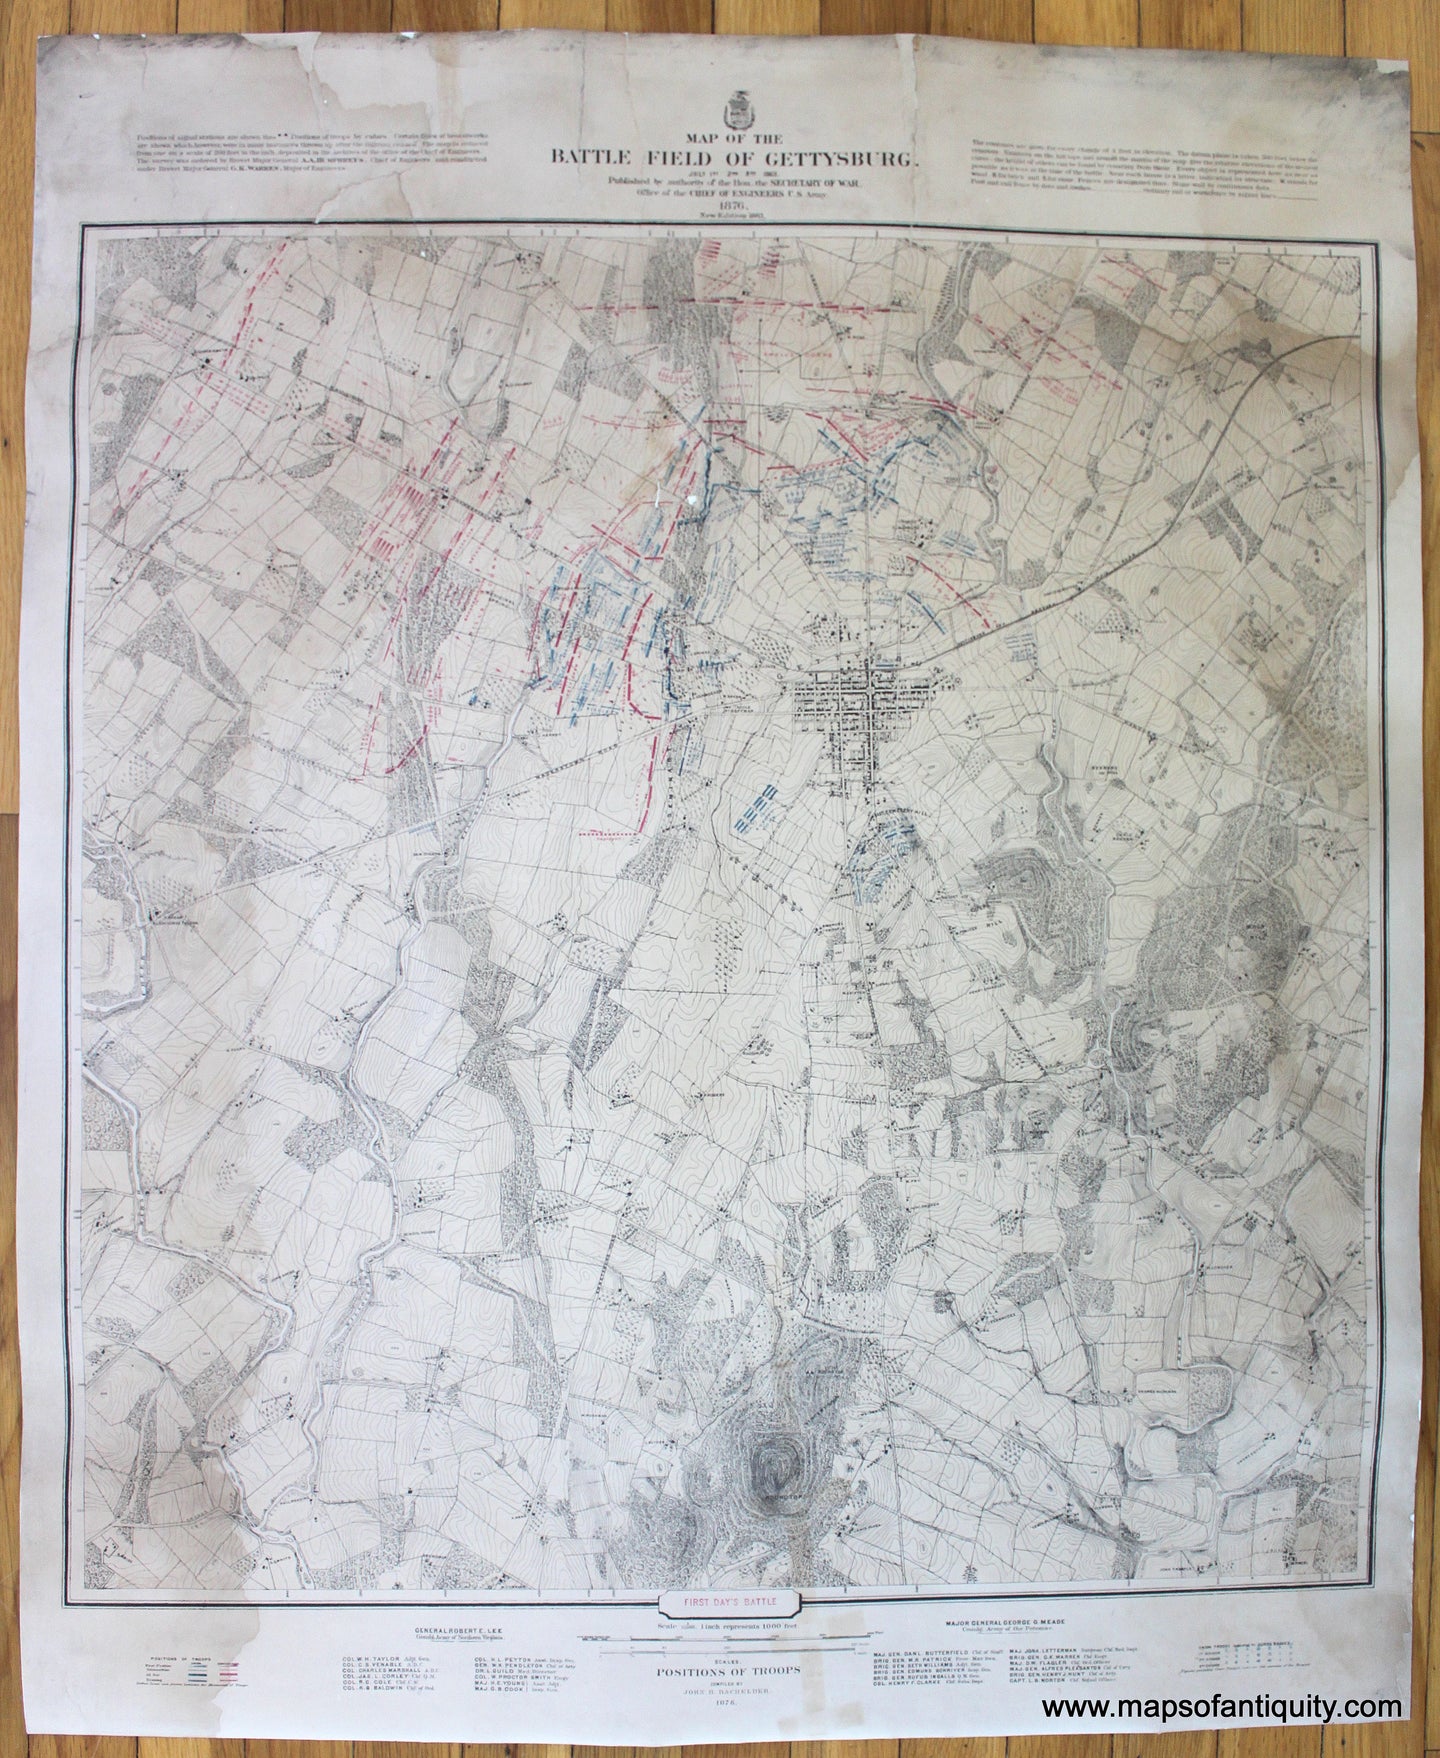 Set-of-3-Antique-Printed-Color-Maps-Map-of-the-Battle-Field-of-Gettysburg.-July-1st-2nd-3rd-1863.-1883-US-Army-Engineers-Civil-War-1800s-19th-century-Maps-of-Antiquity